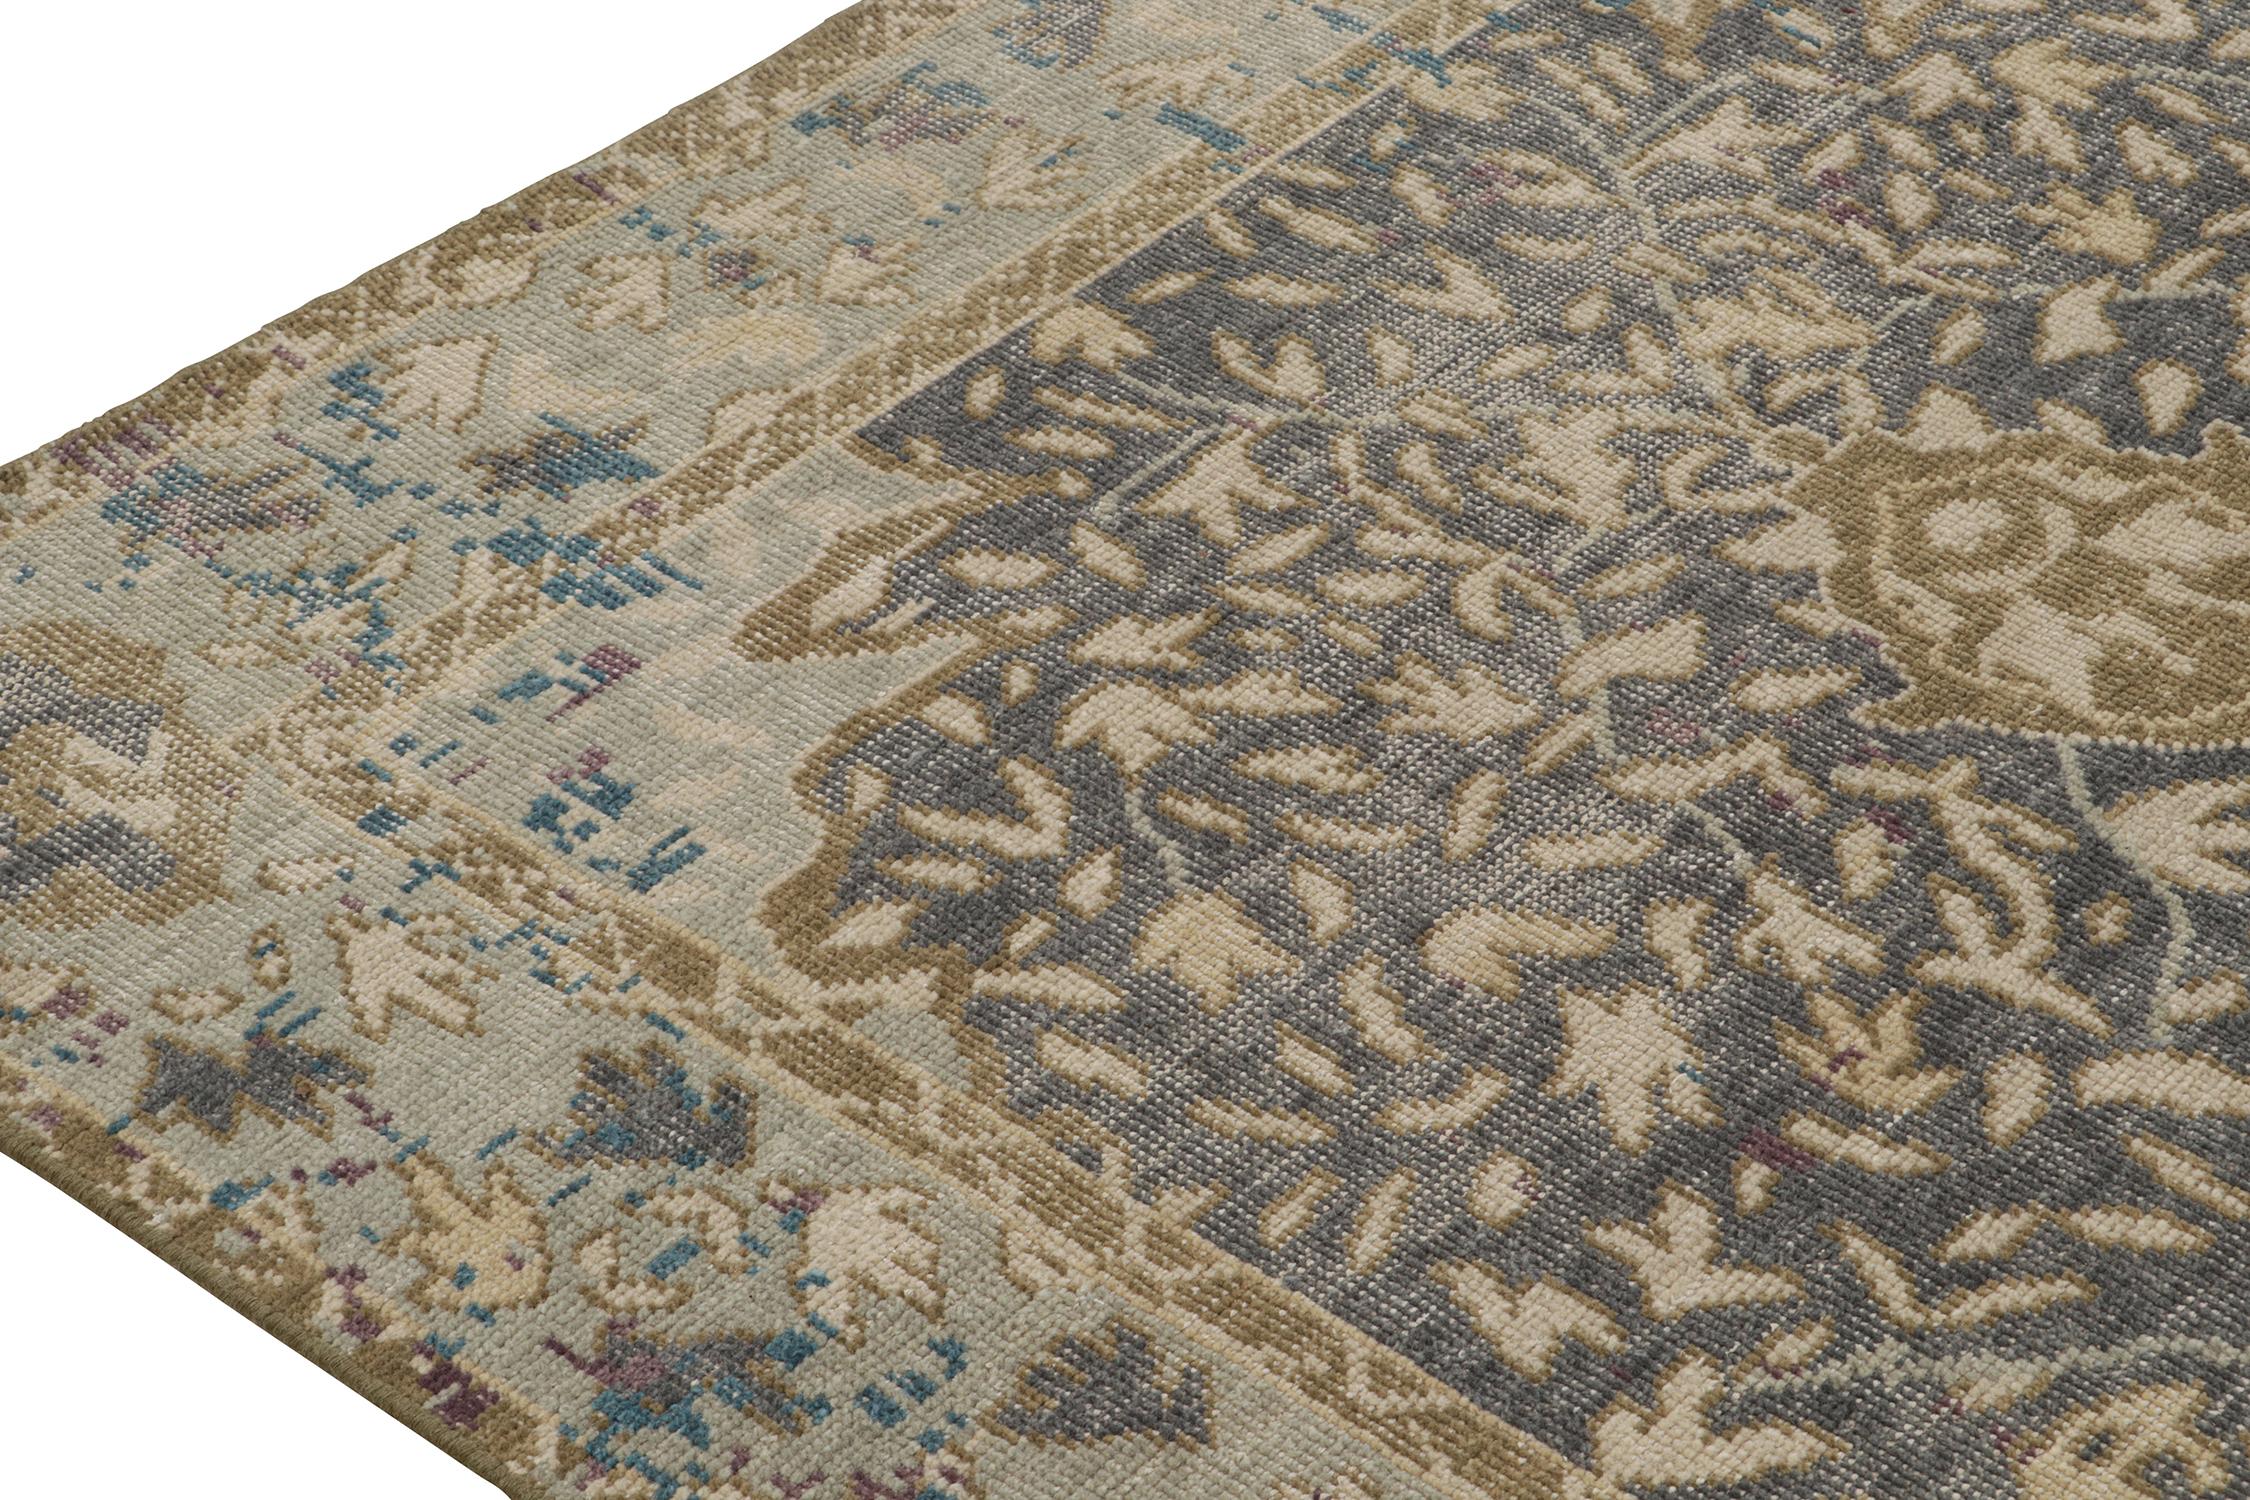 Rug & Kilim's Distressed Classic Style Teppich mit eisblauem Medaillon-Muster im Zustand „Neu“ im Angebot in Long Island City, NY